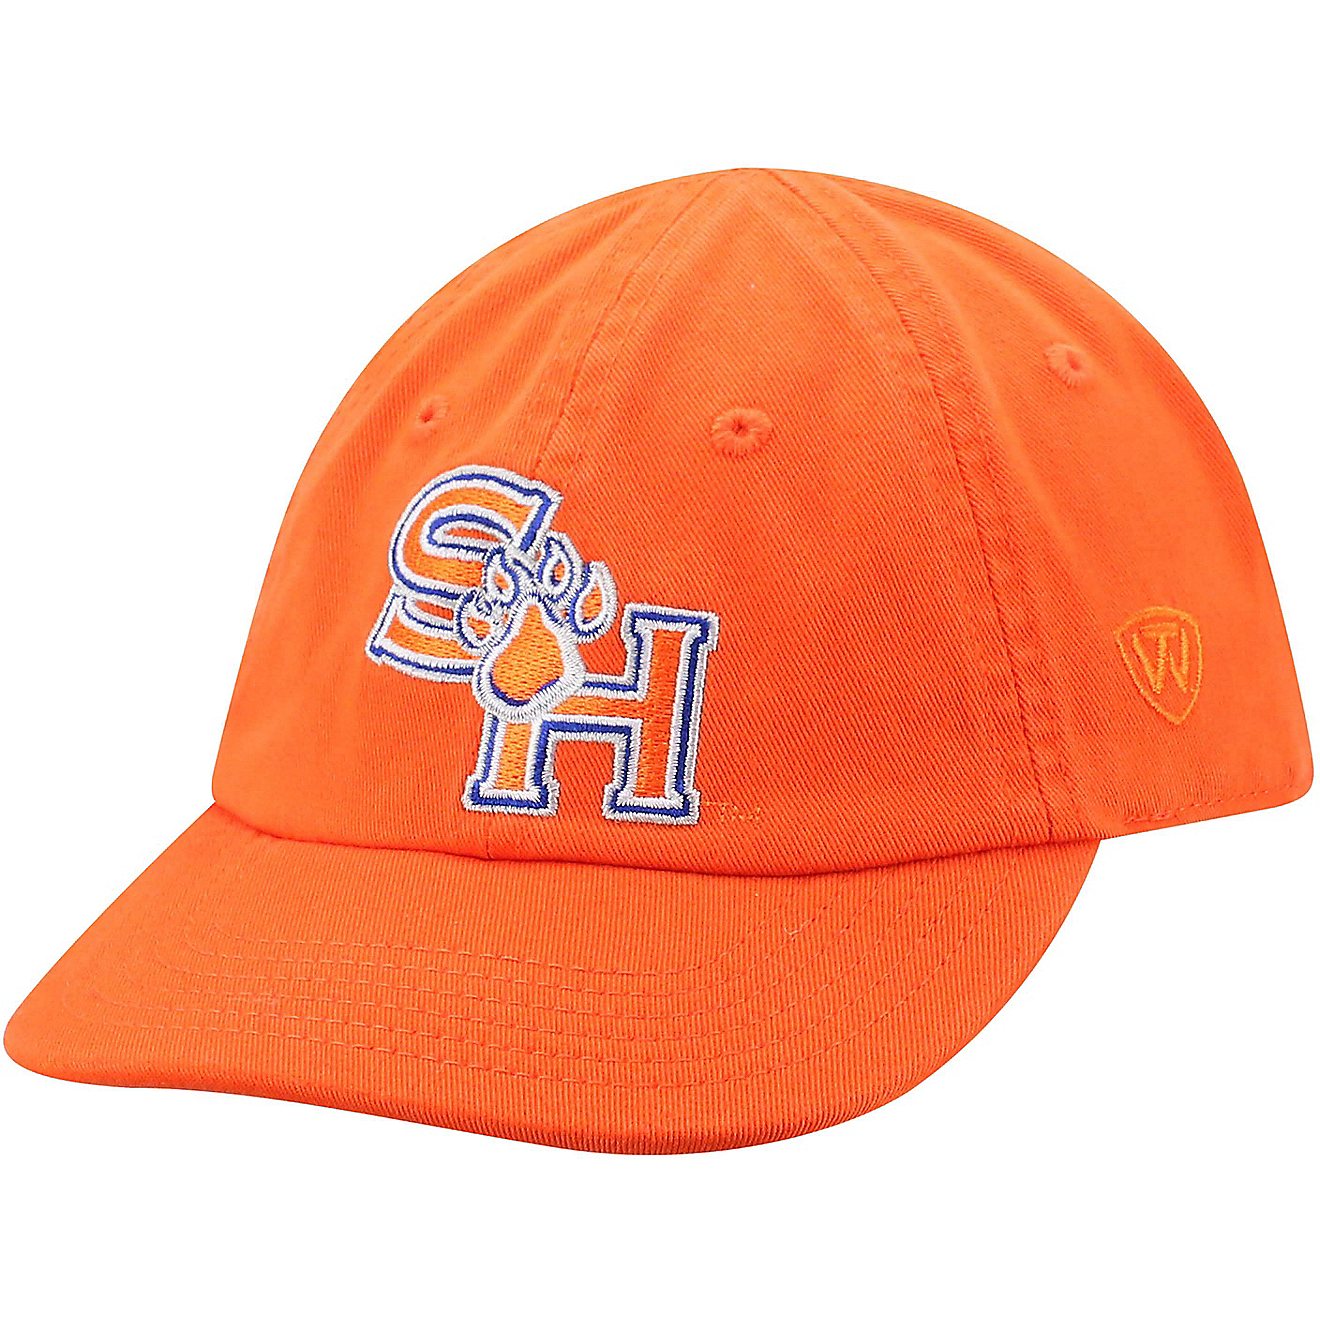 Top of the World Infants' Sam Houston State University Mini Me Cap                                                               - view number 2